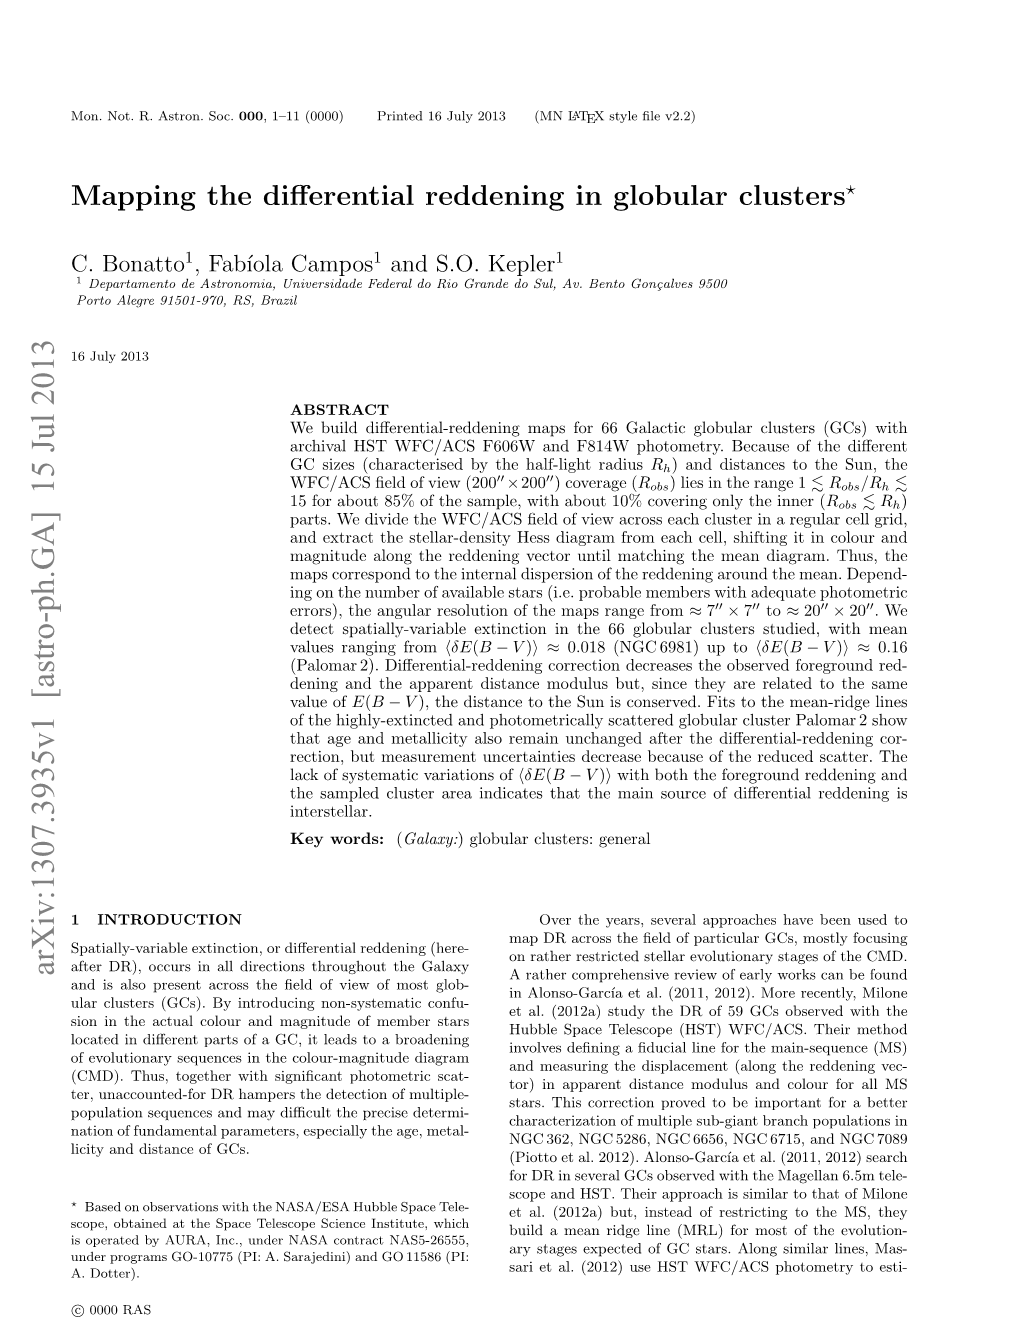 Mapping the Differential Reddening in Globular Clusters